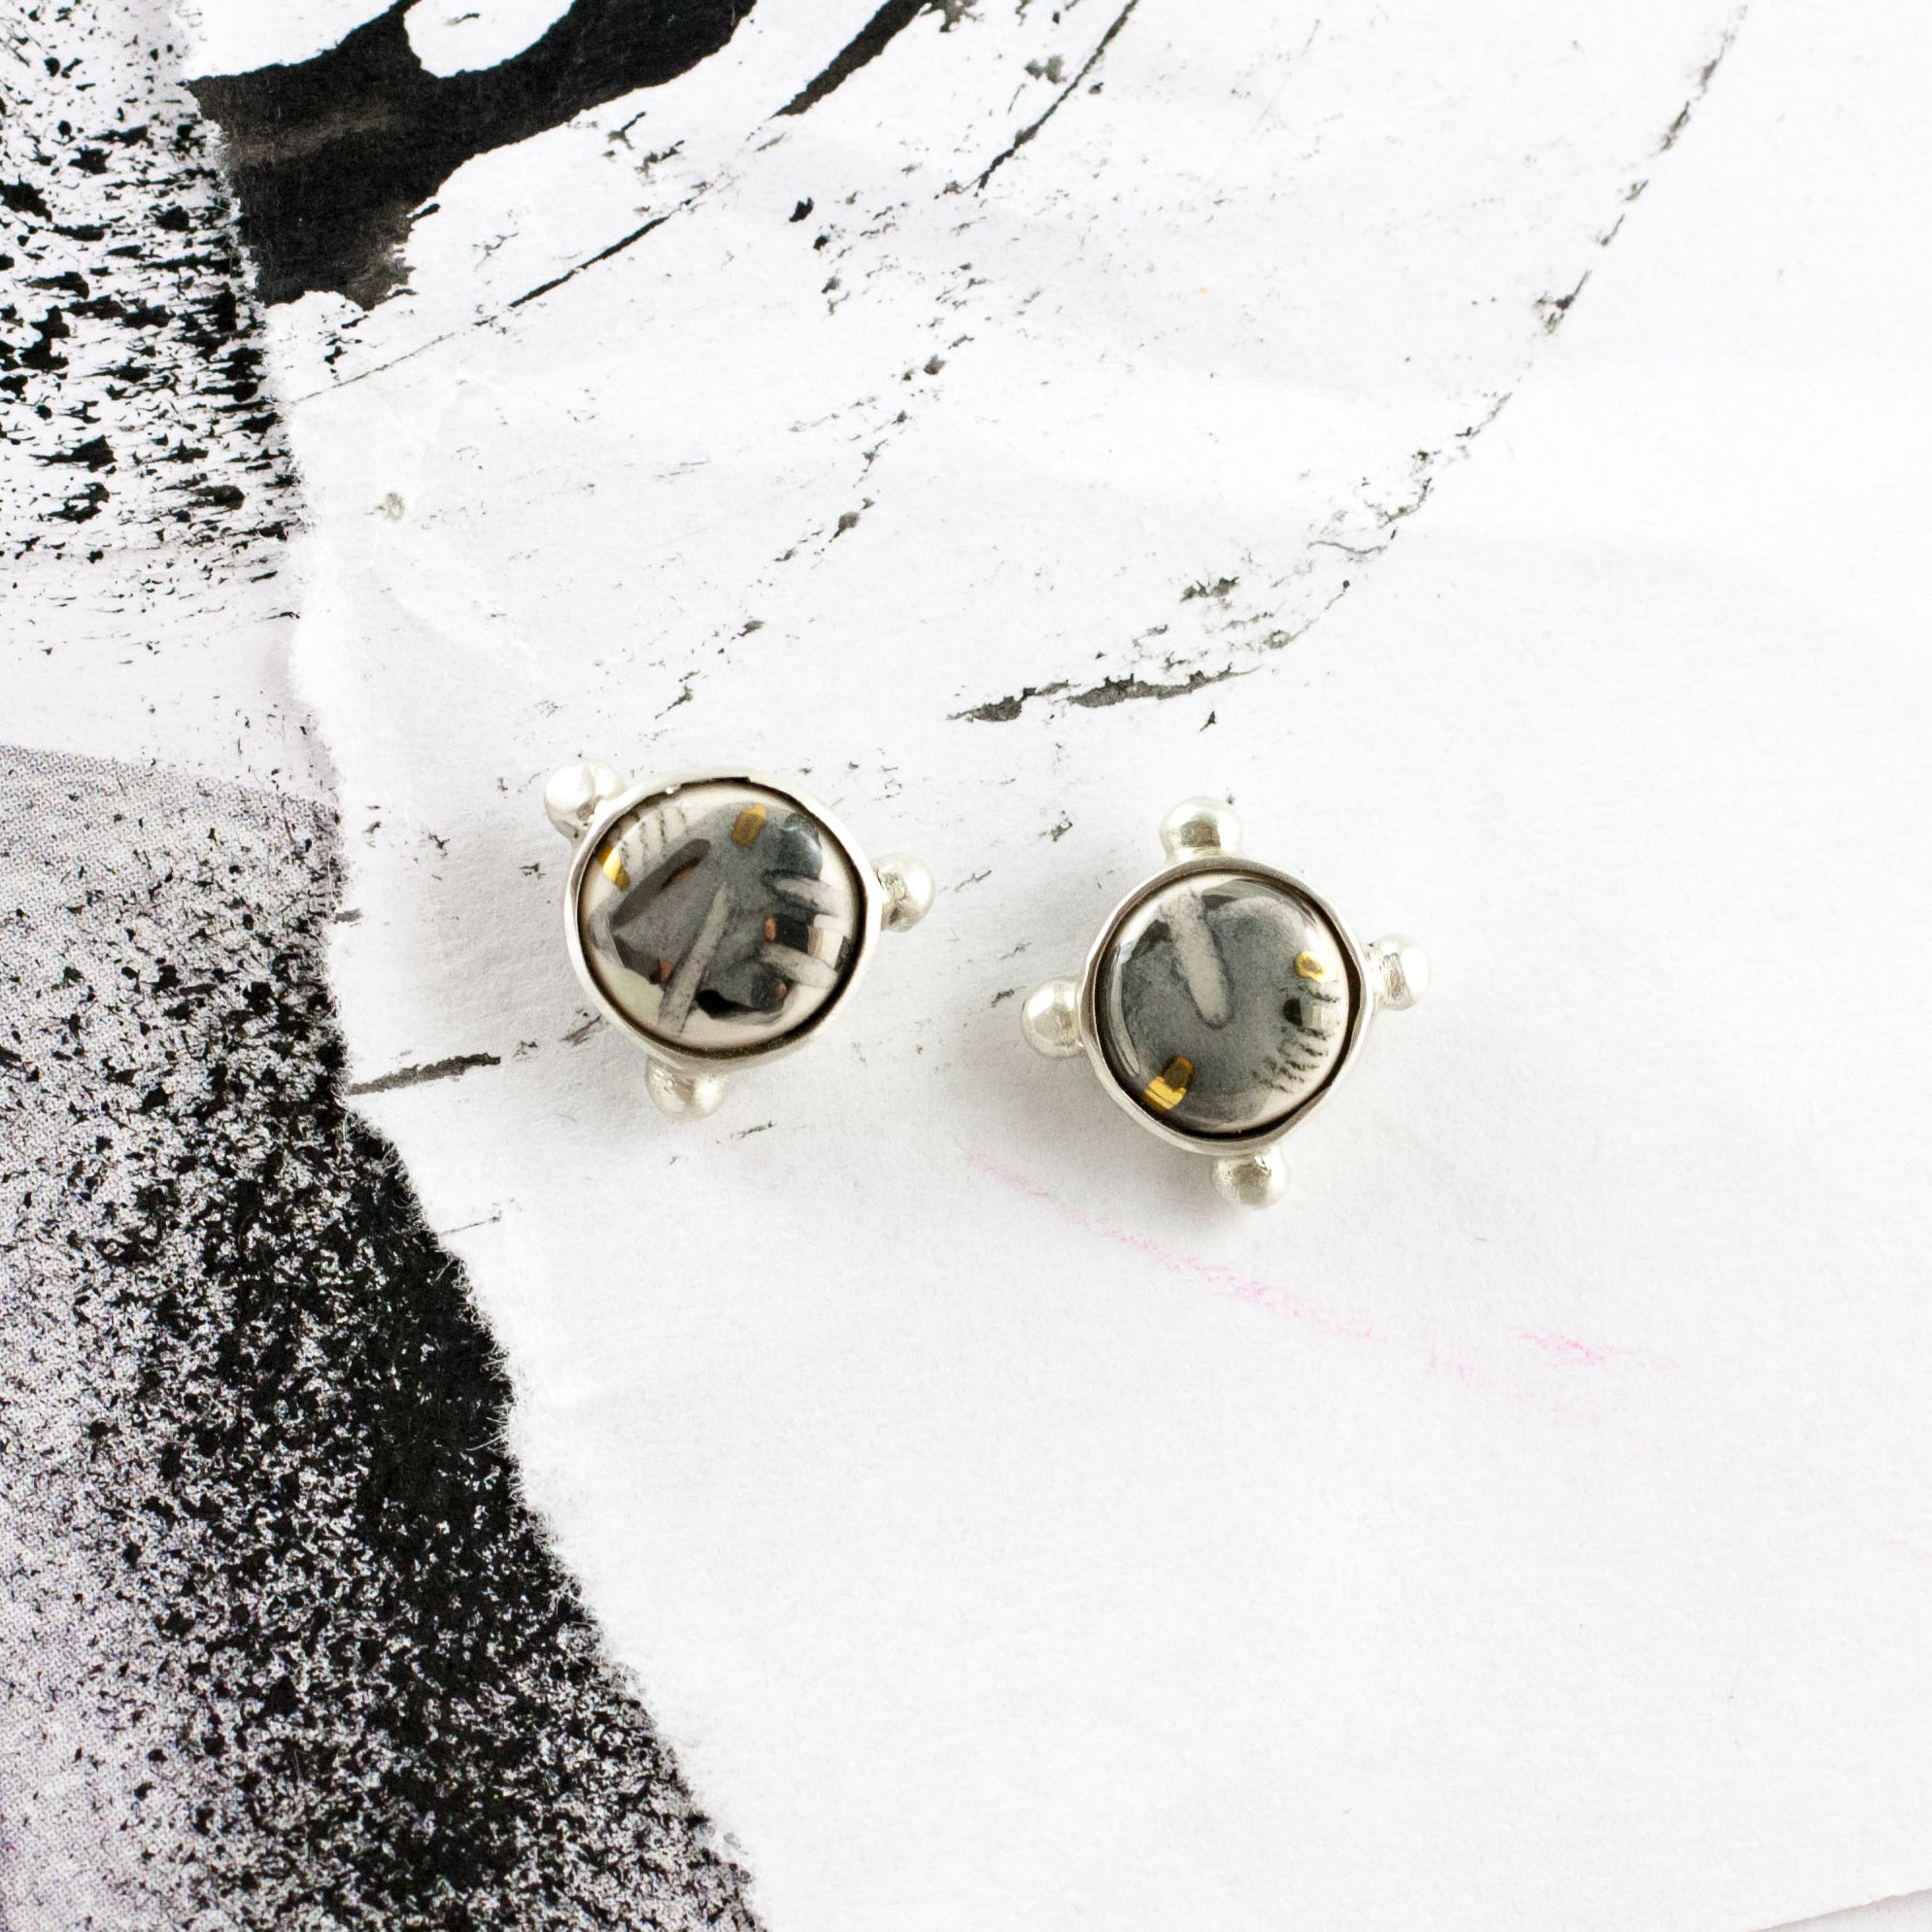 White and grey ABSTRACT earrings with gold lines